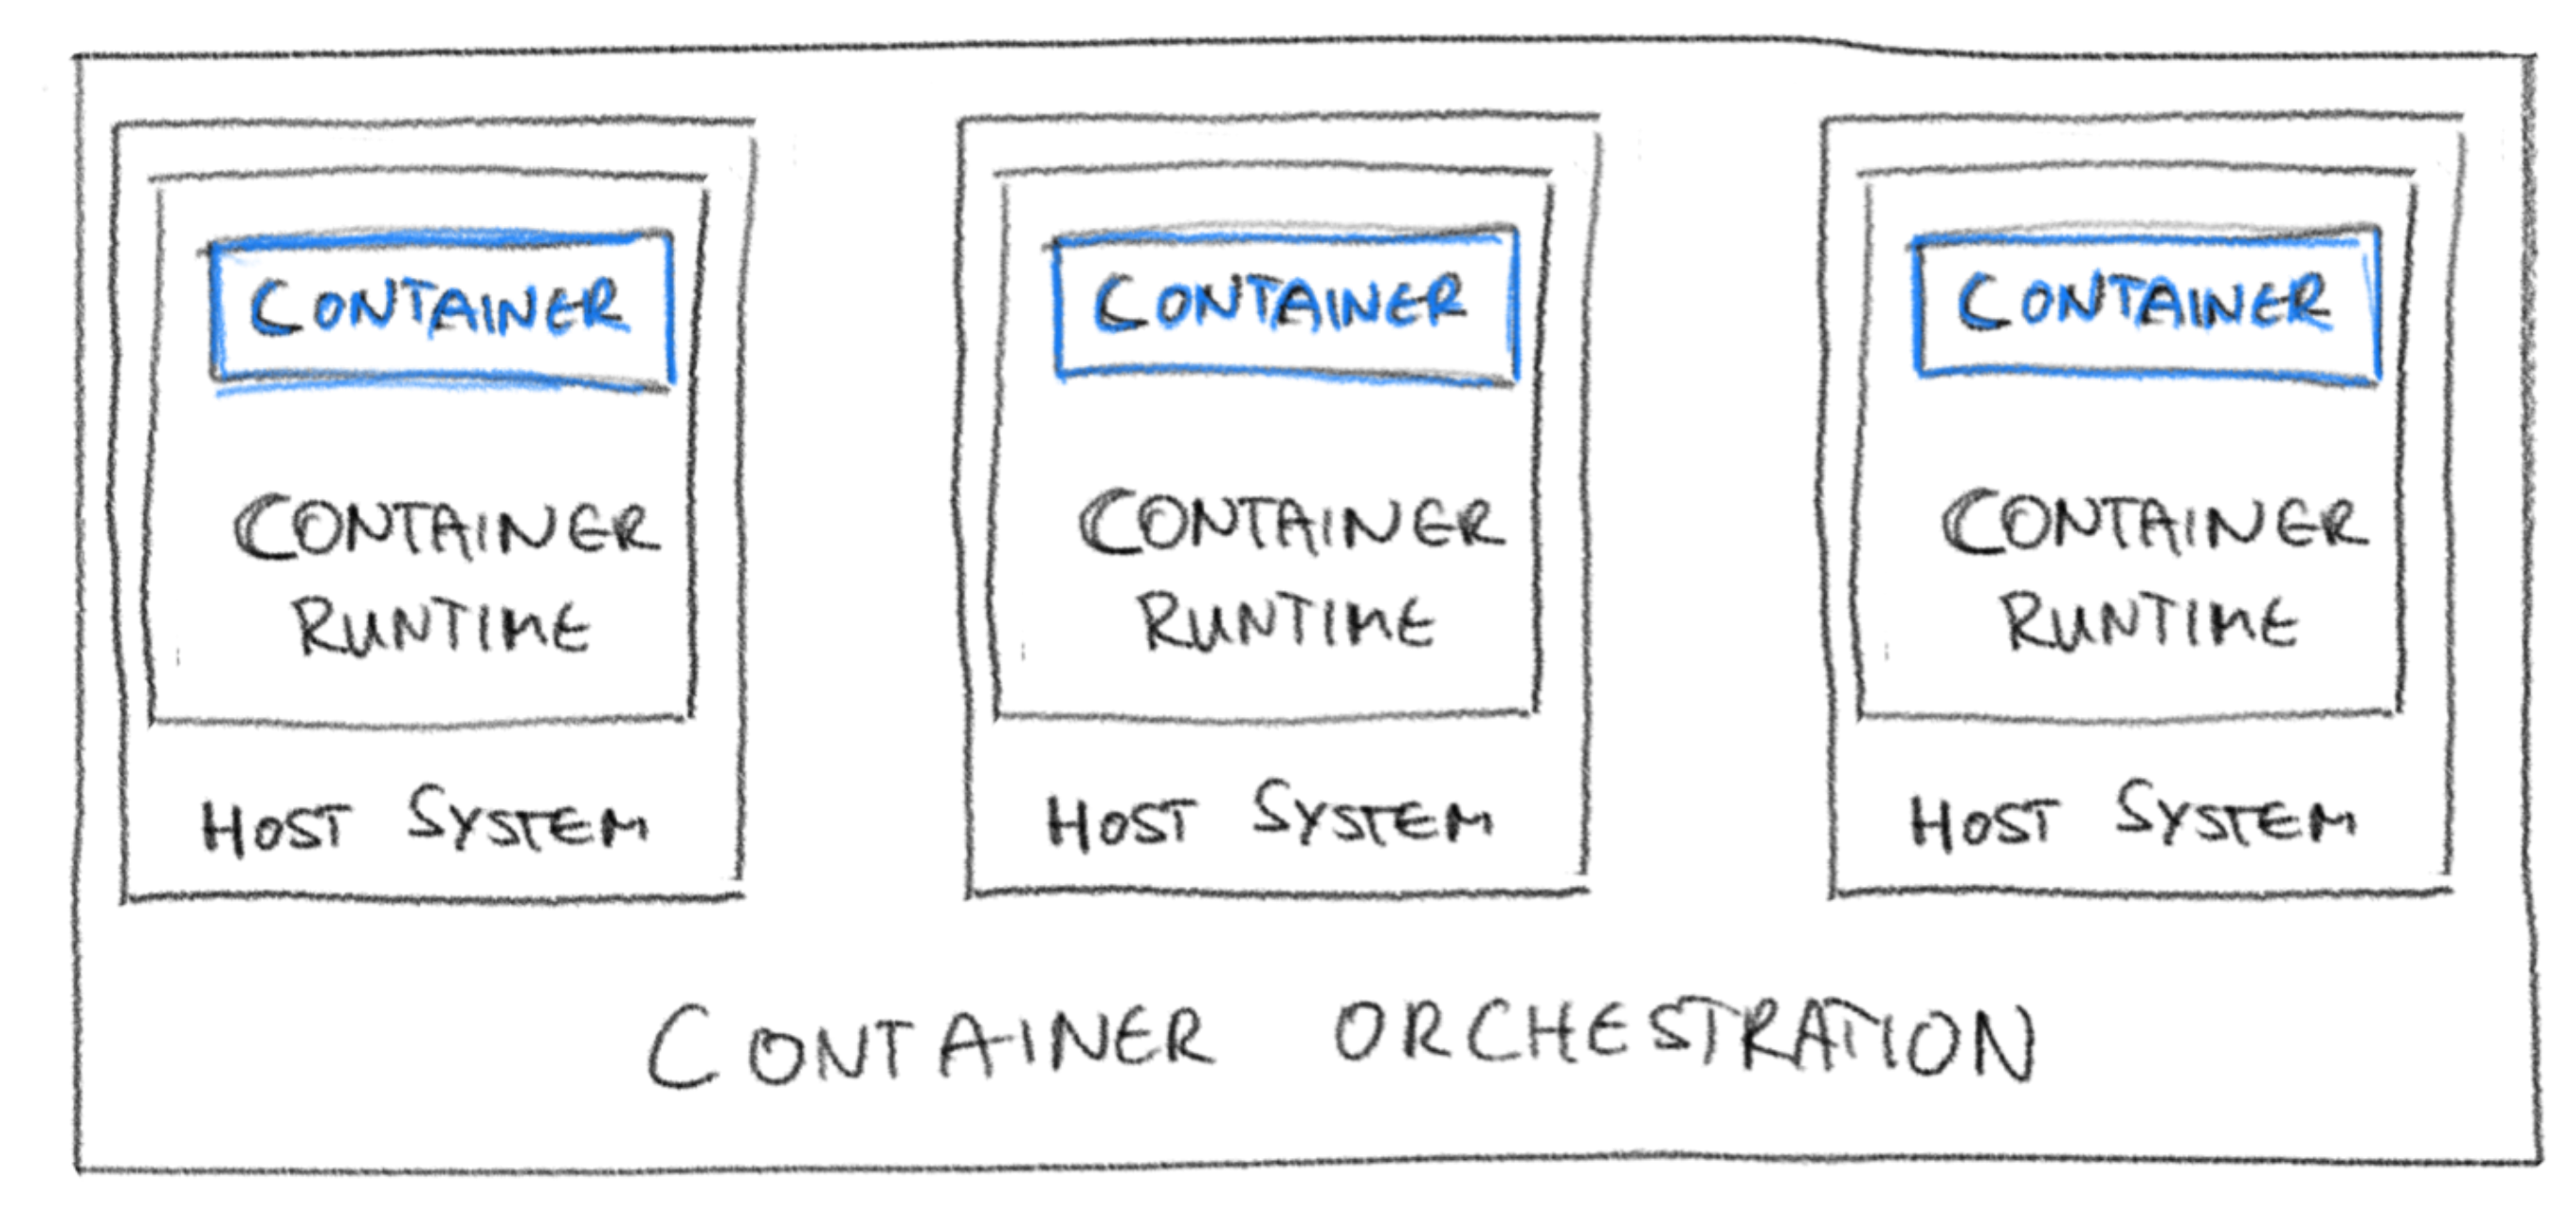 Container.png